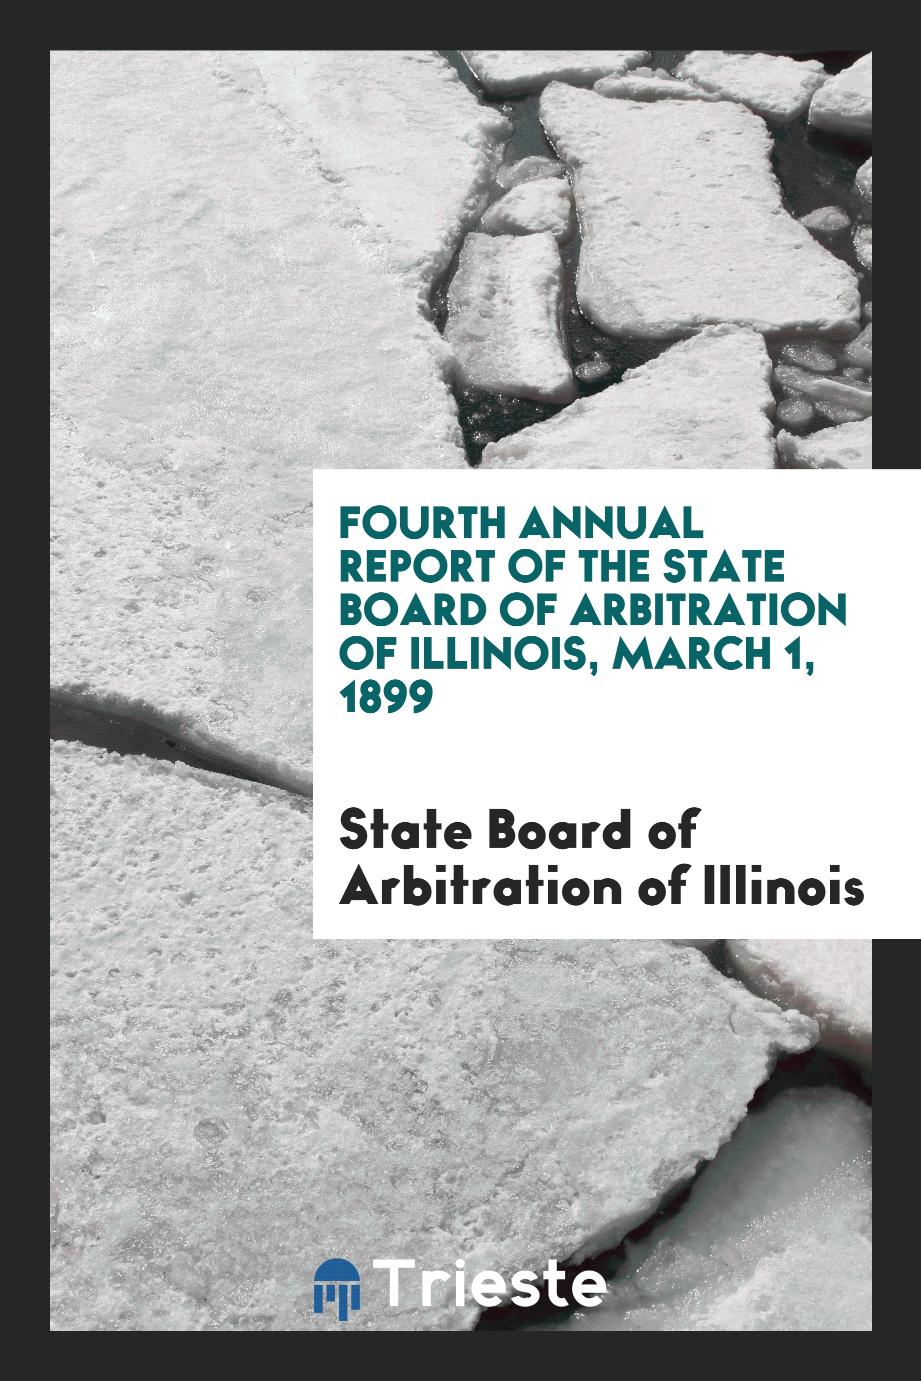 Fourth Annual Report of the State Board of Arbitration of Illinois, March 1, 1899